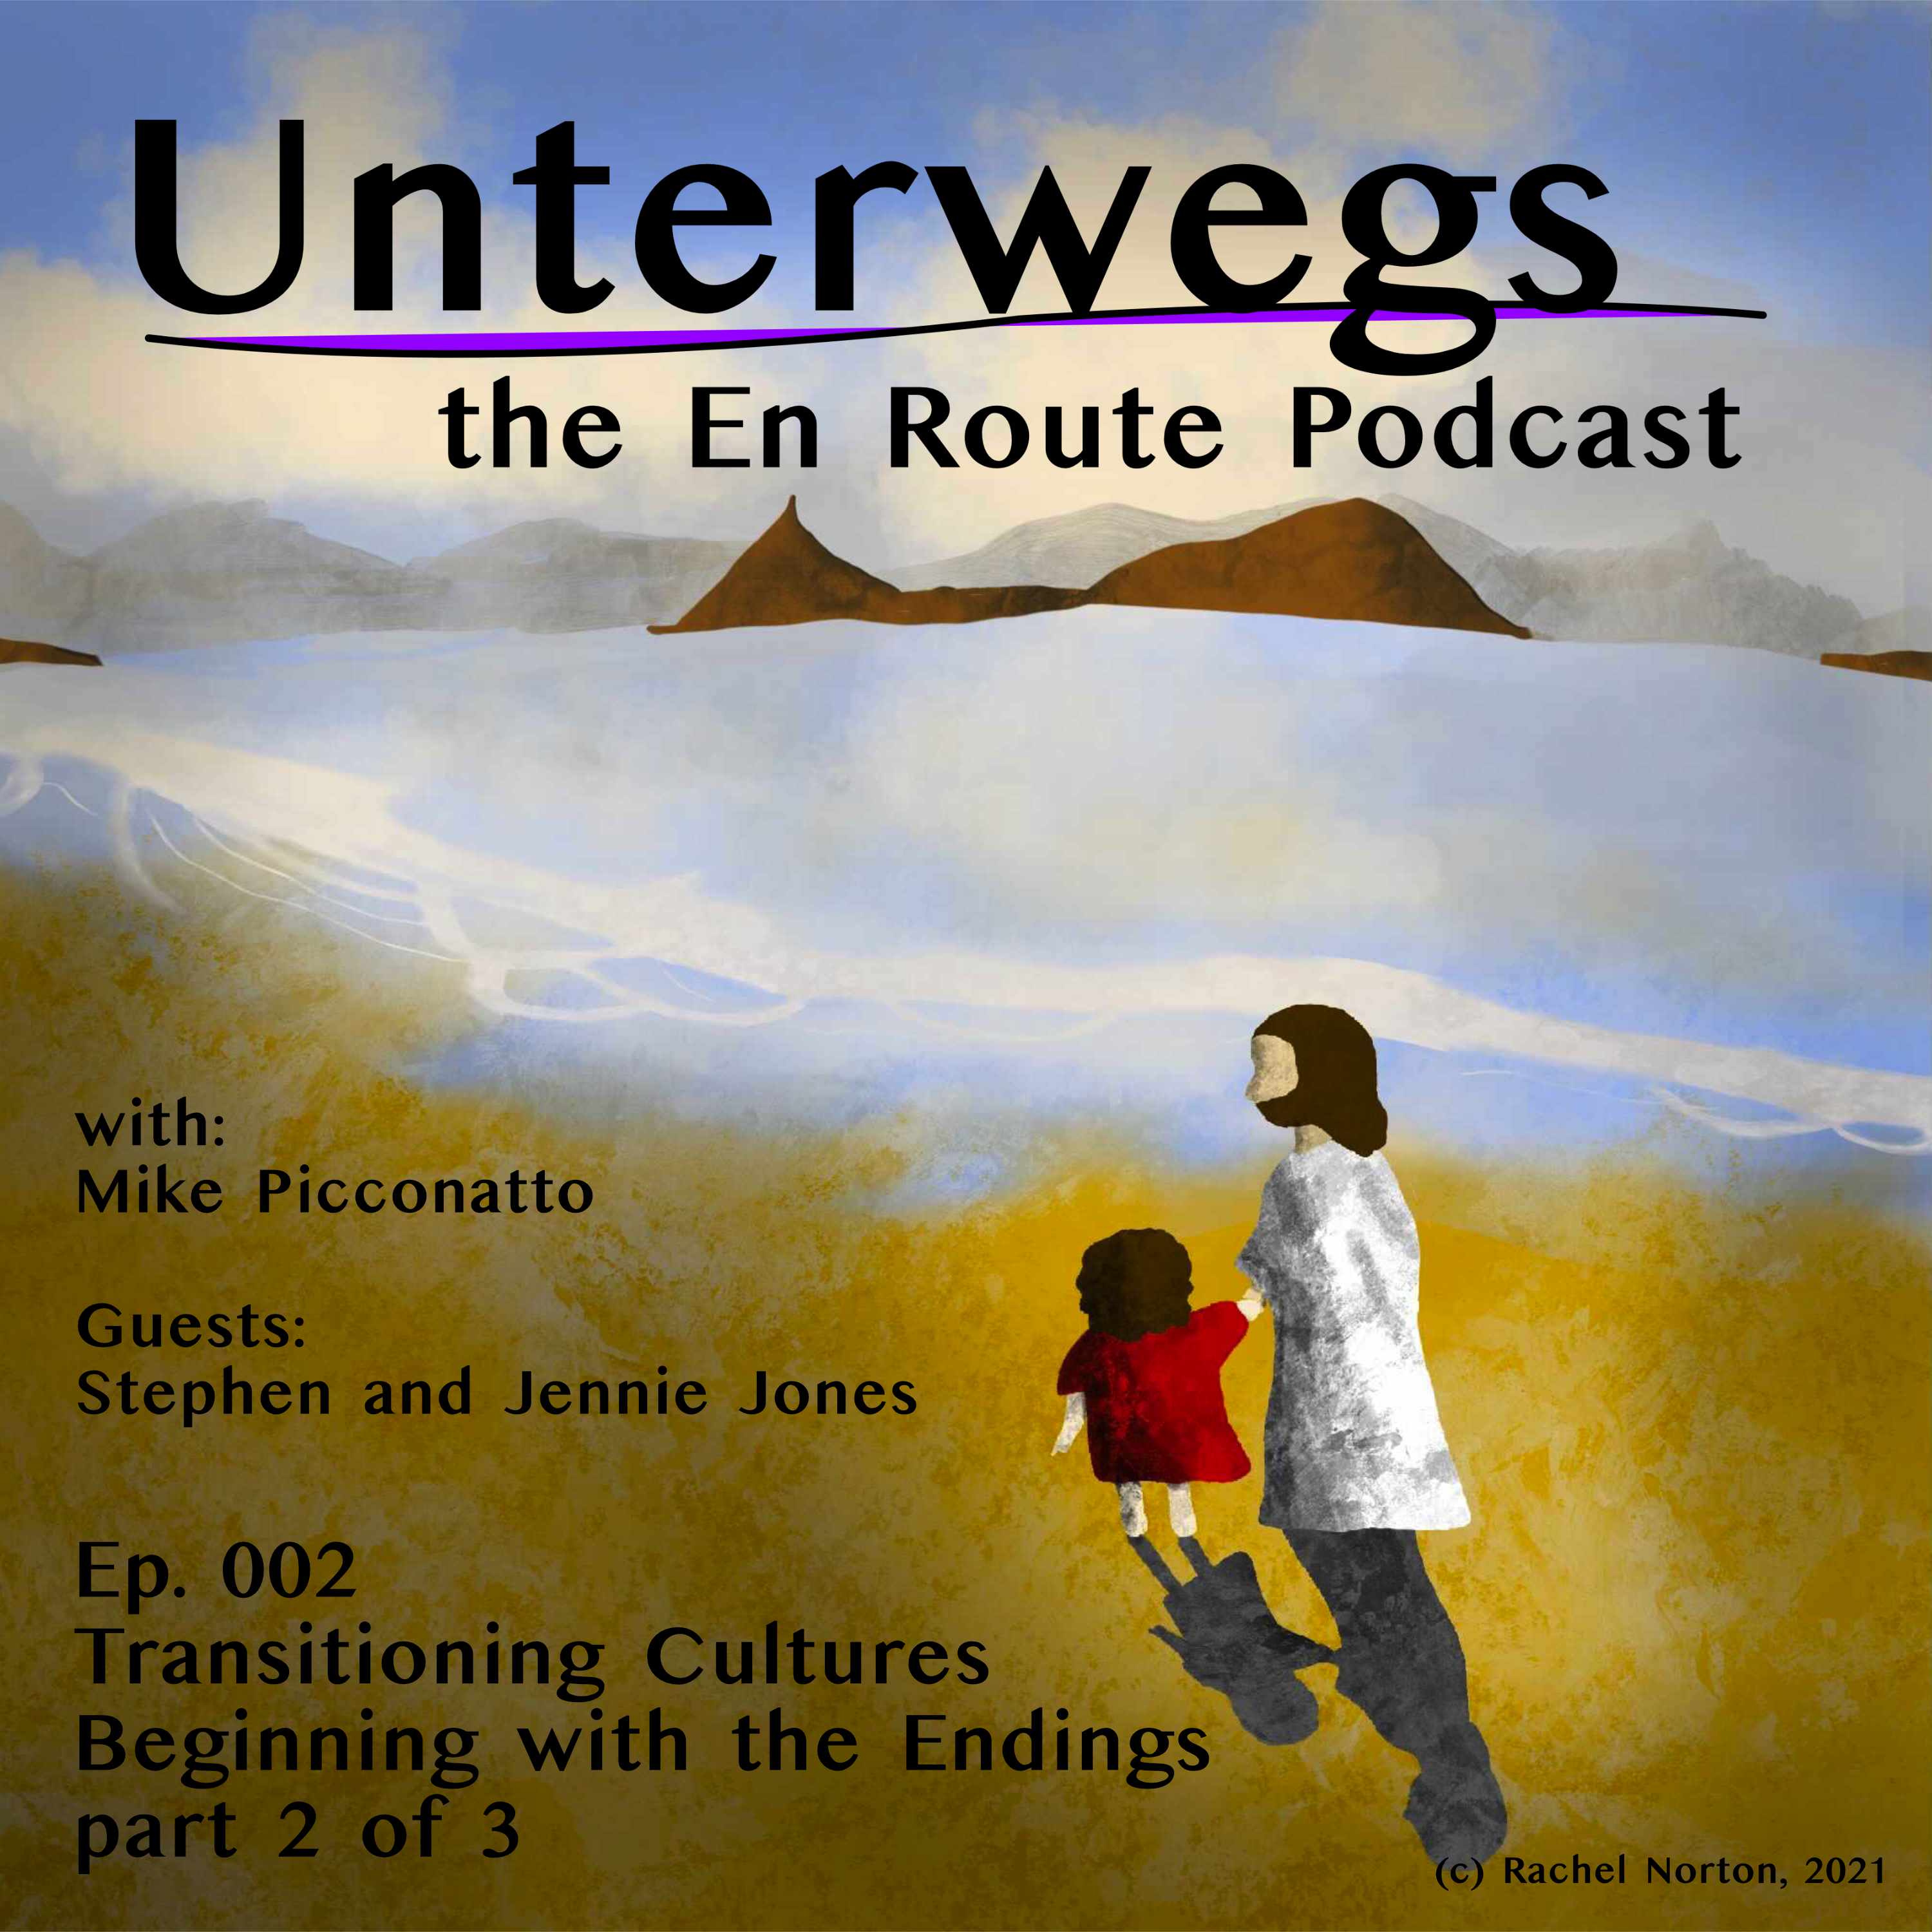 Episode 002 - Beginning with the Endings part 2 of 3